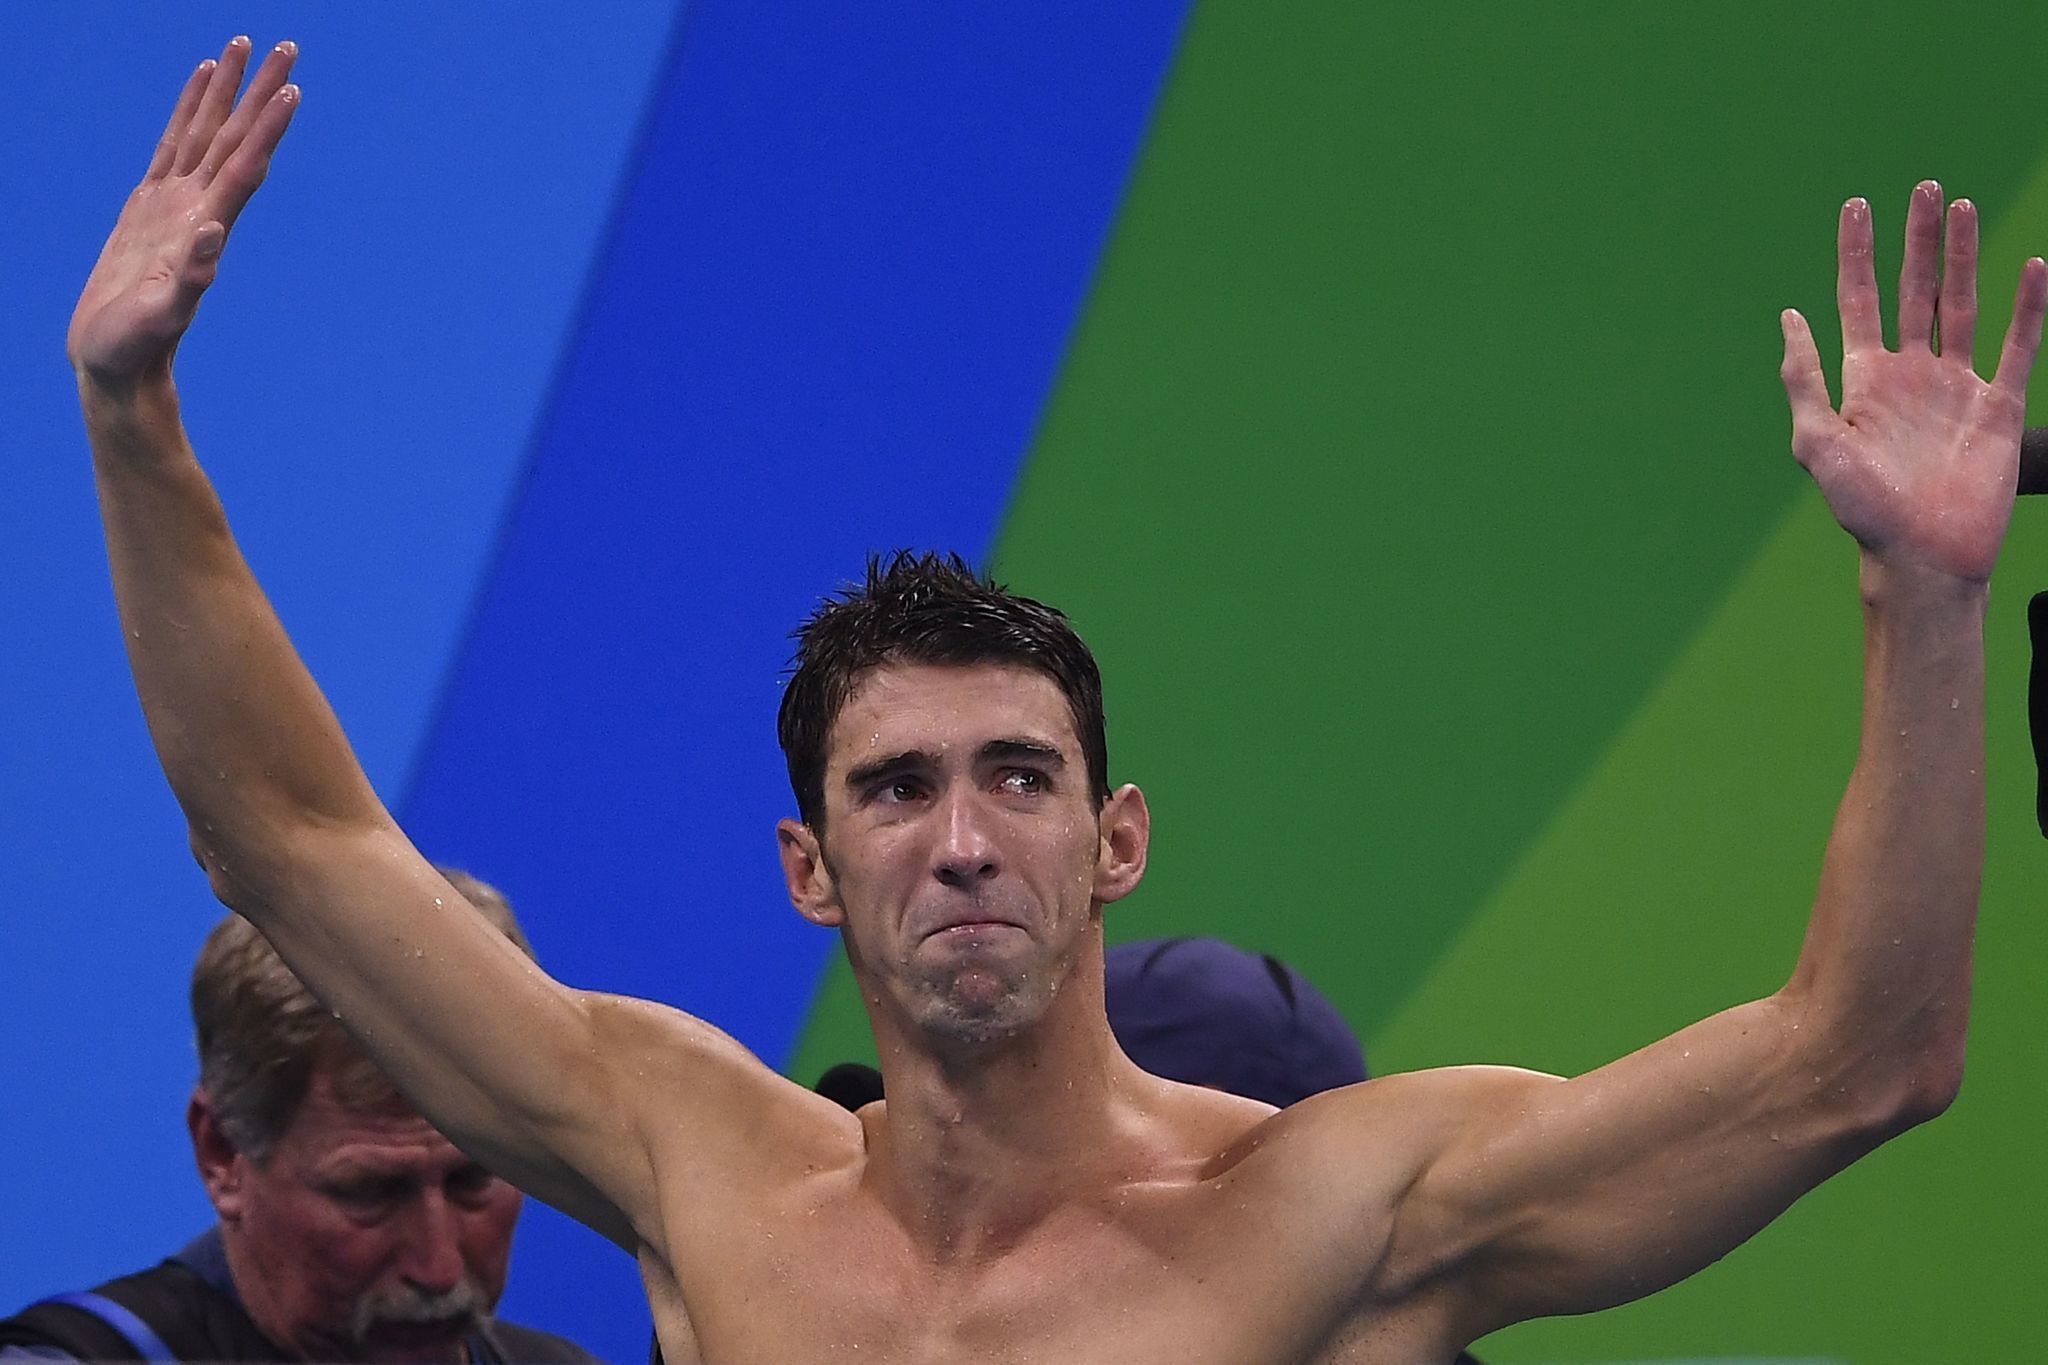 Michael Phelps will get a statue in Baltimore, but what 